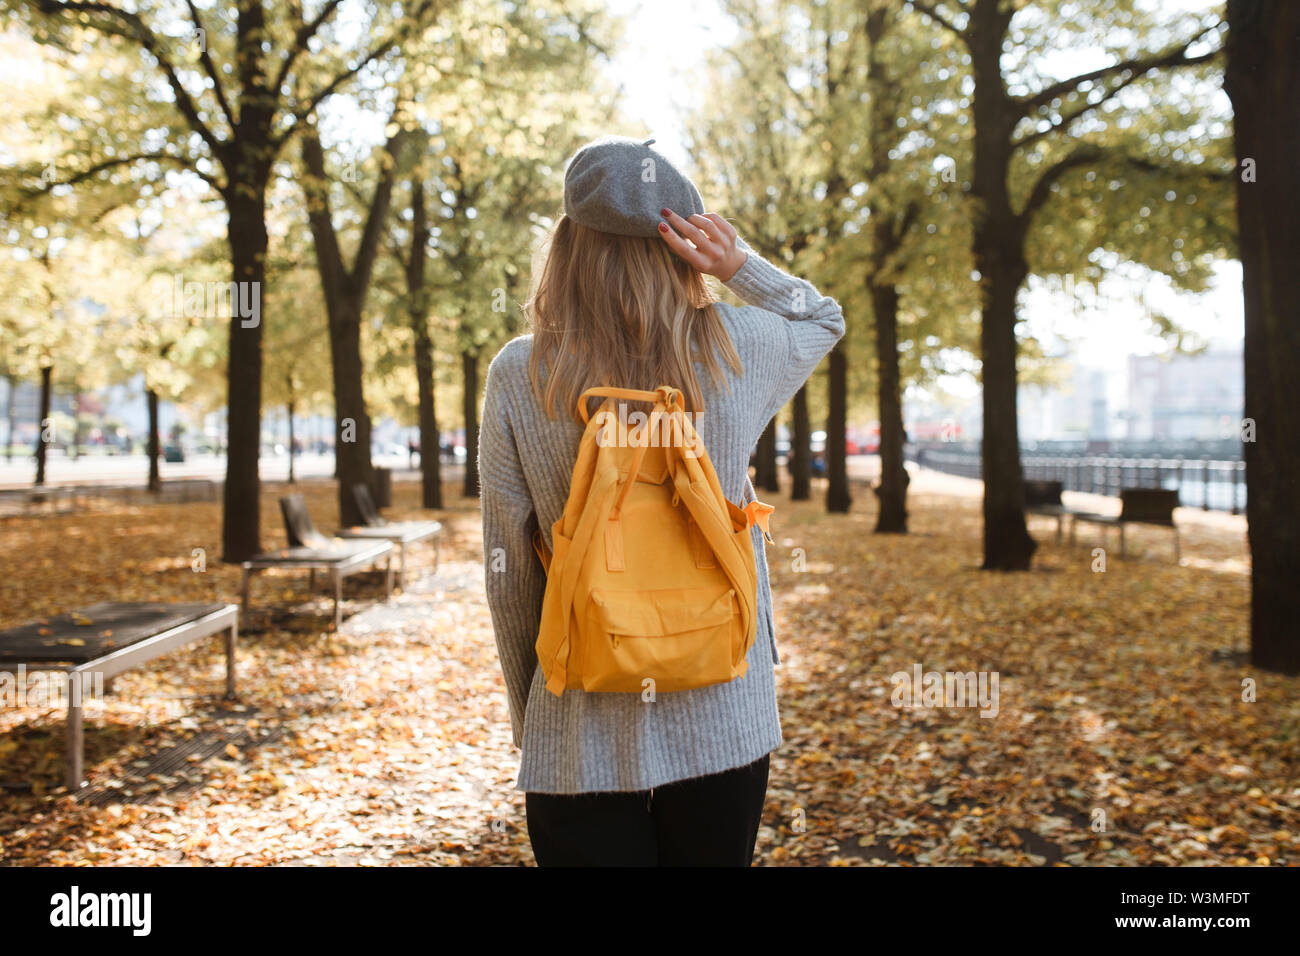 Young woman with yellow backpack in park in Berlin, Germany Stock Photo